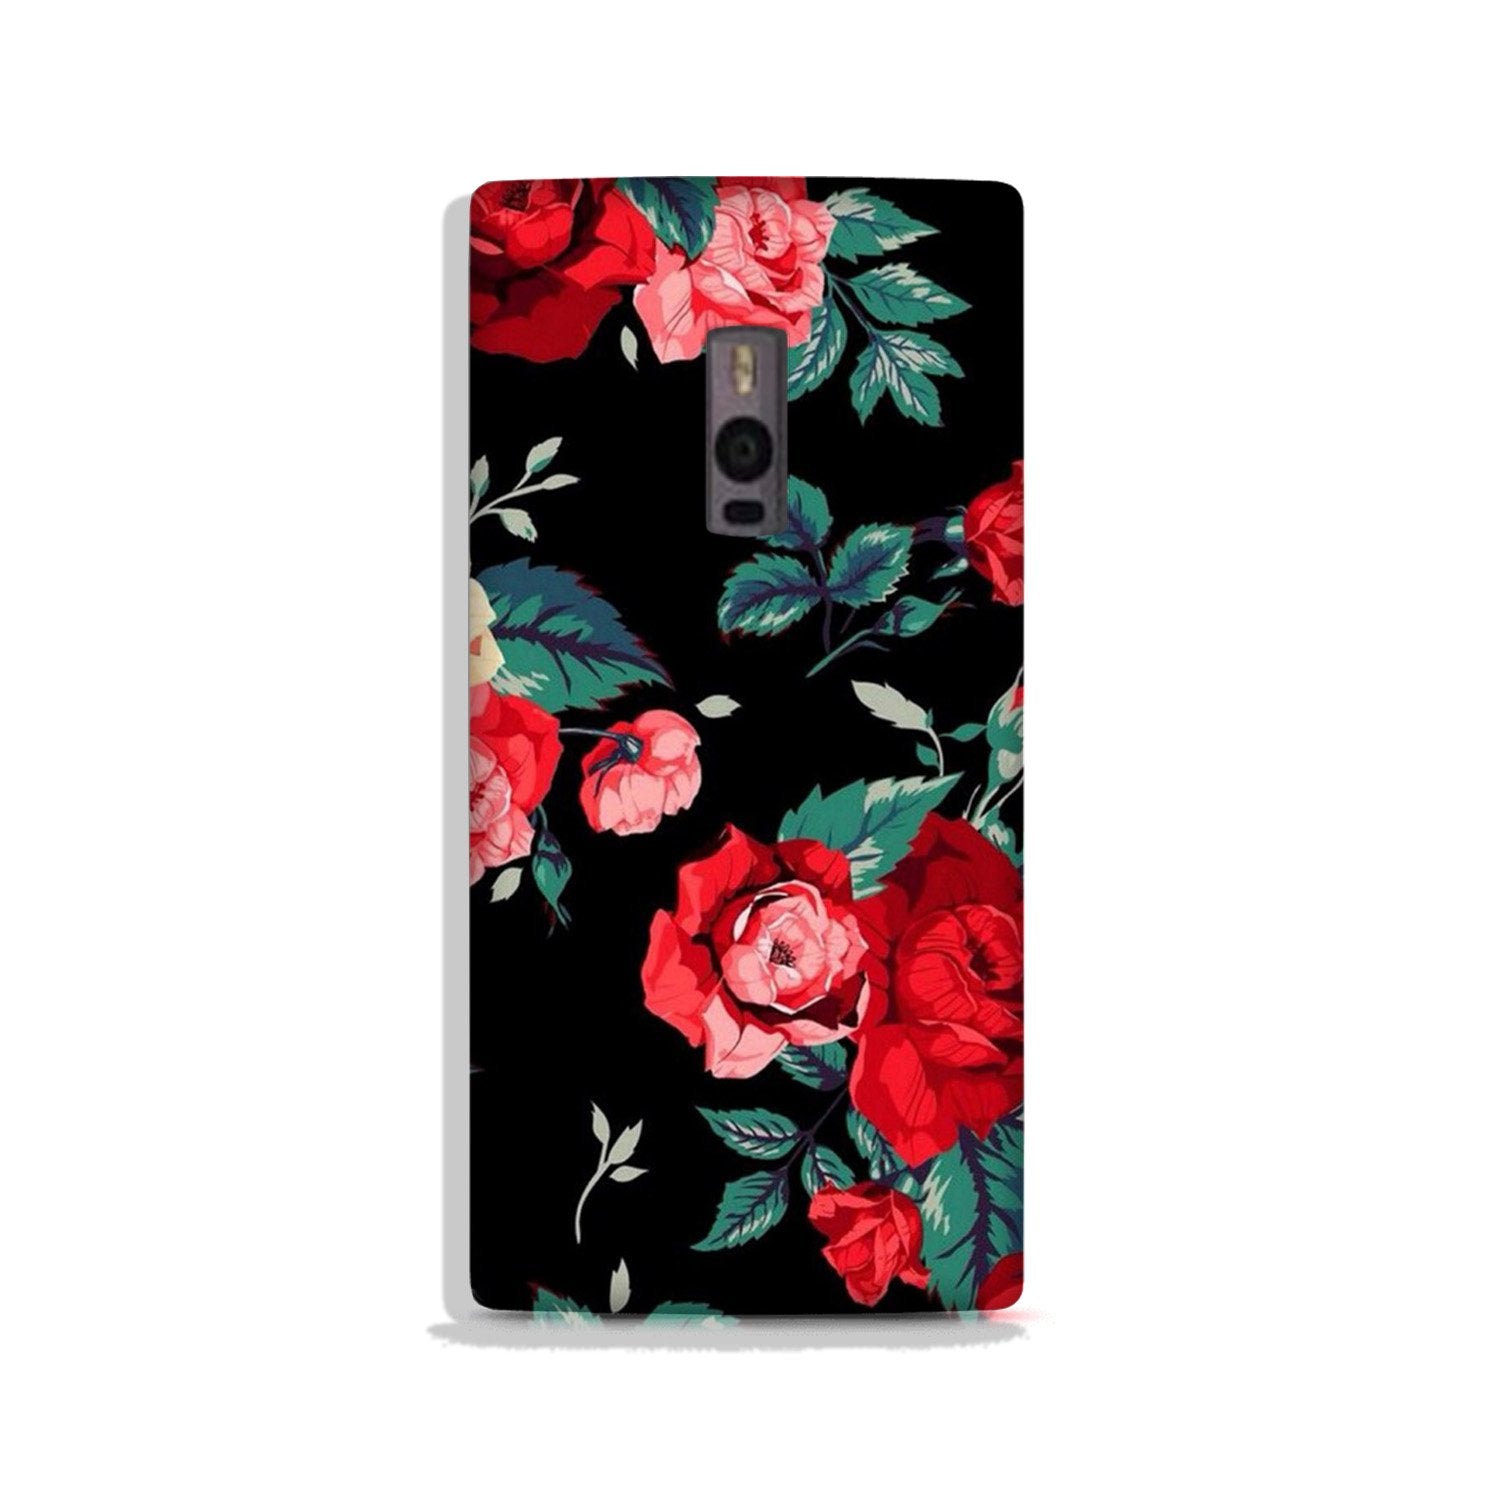 Red Rose2 Case for OnePlus 2